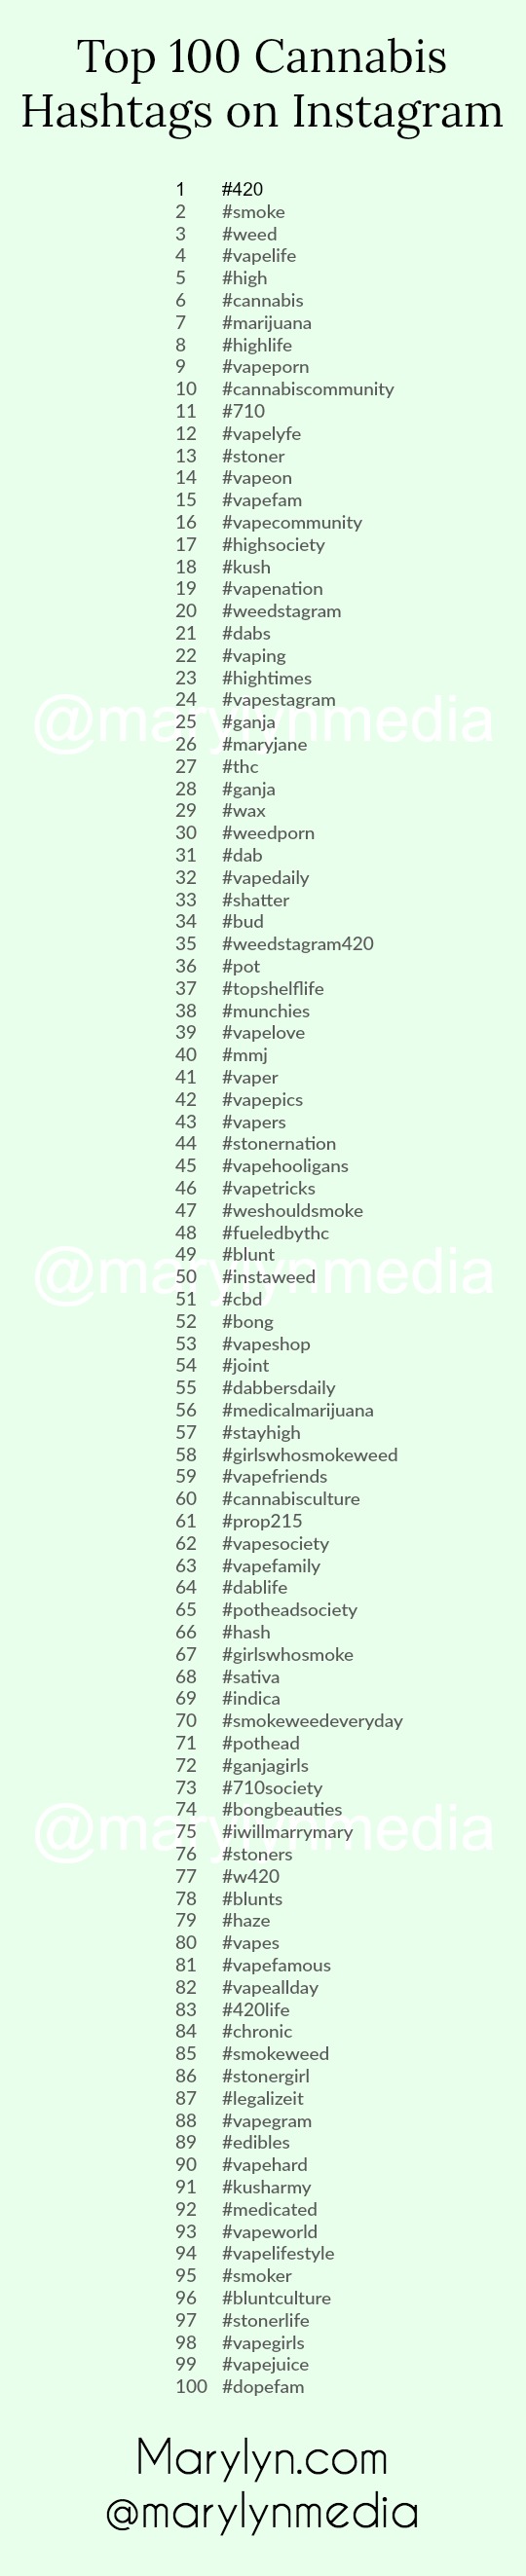 Top 100 Cannabis Hashtags on Instagram by MarylynMedia